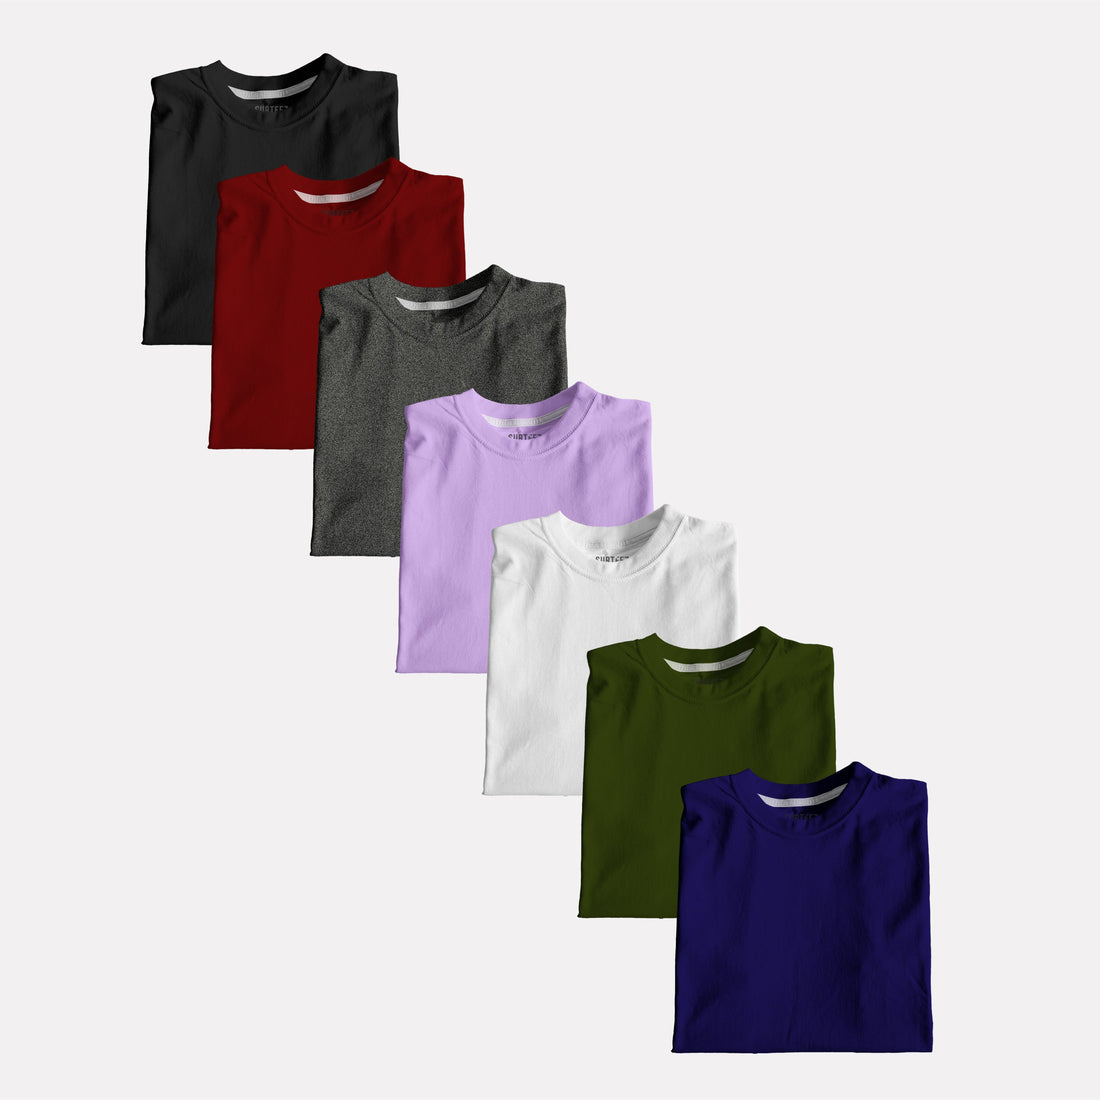 Any Pack of 8 Basic Tees